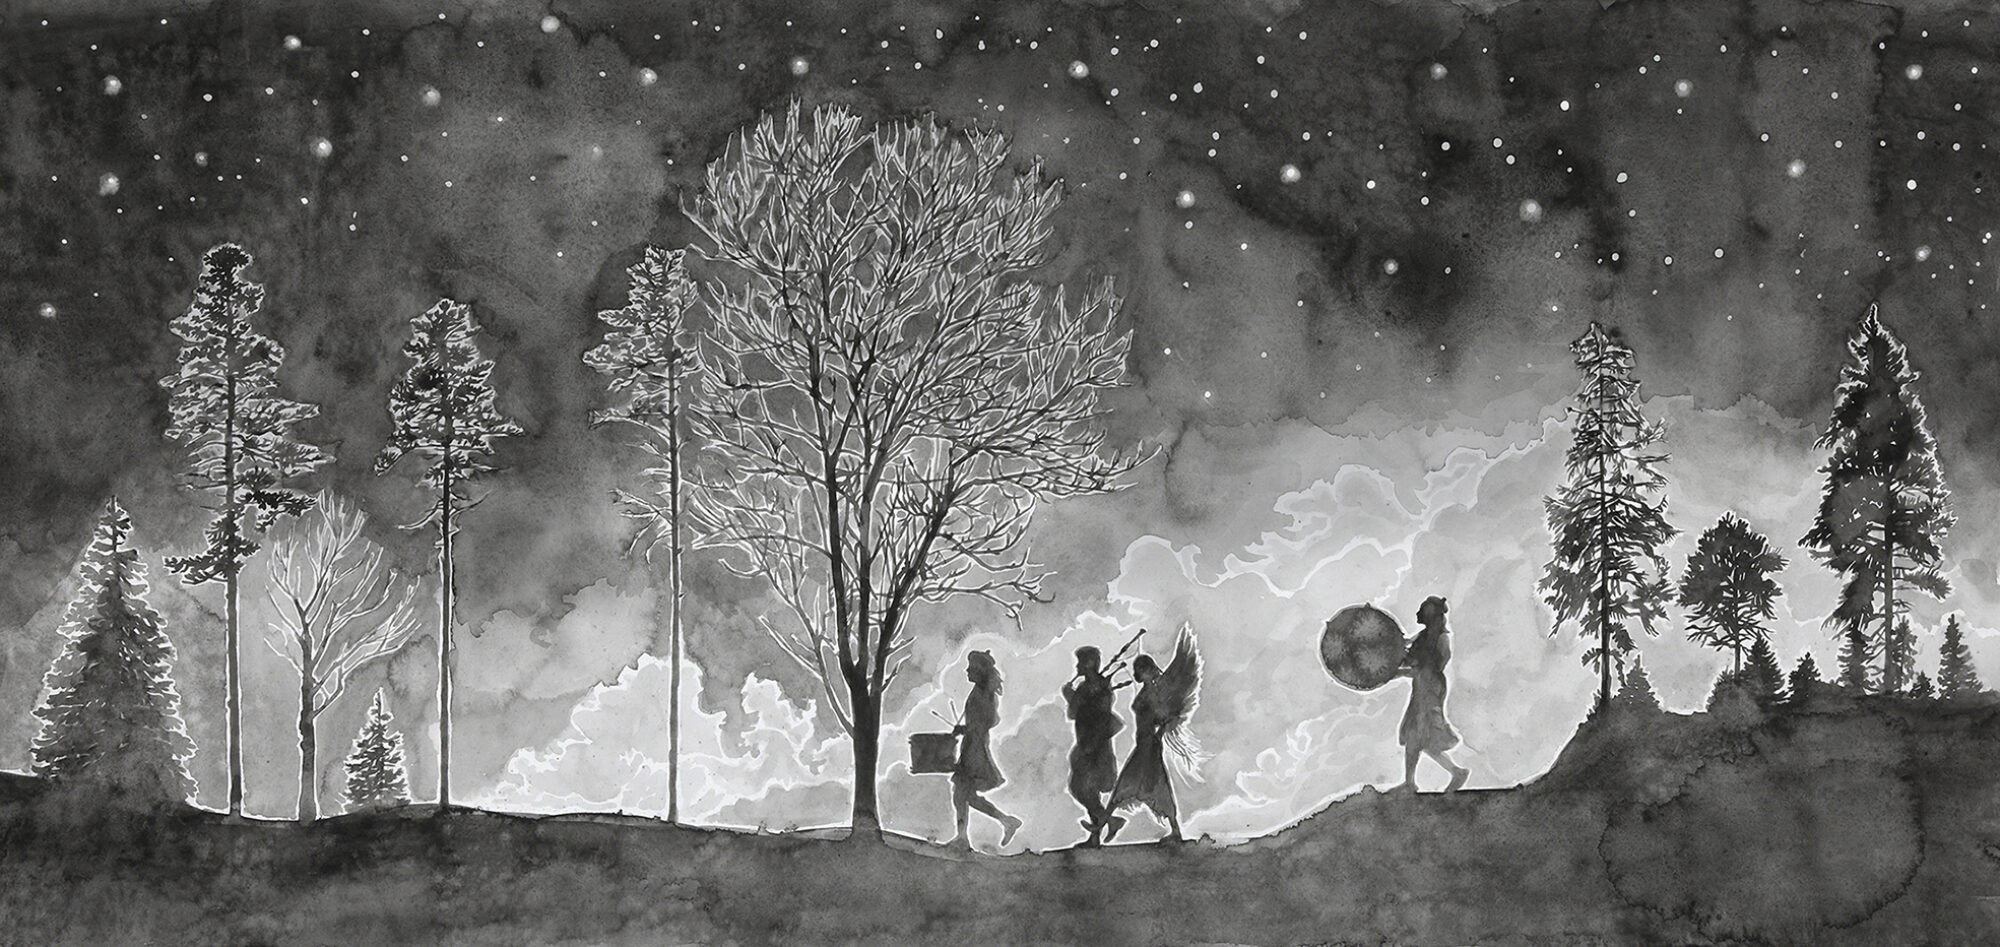 Watercolours: The Night Walkers (1)